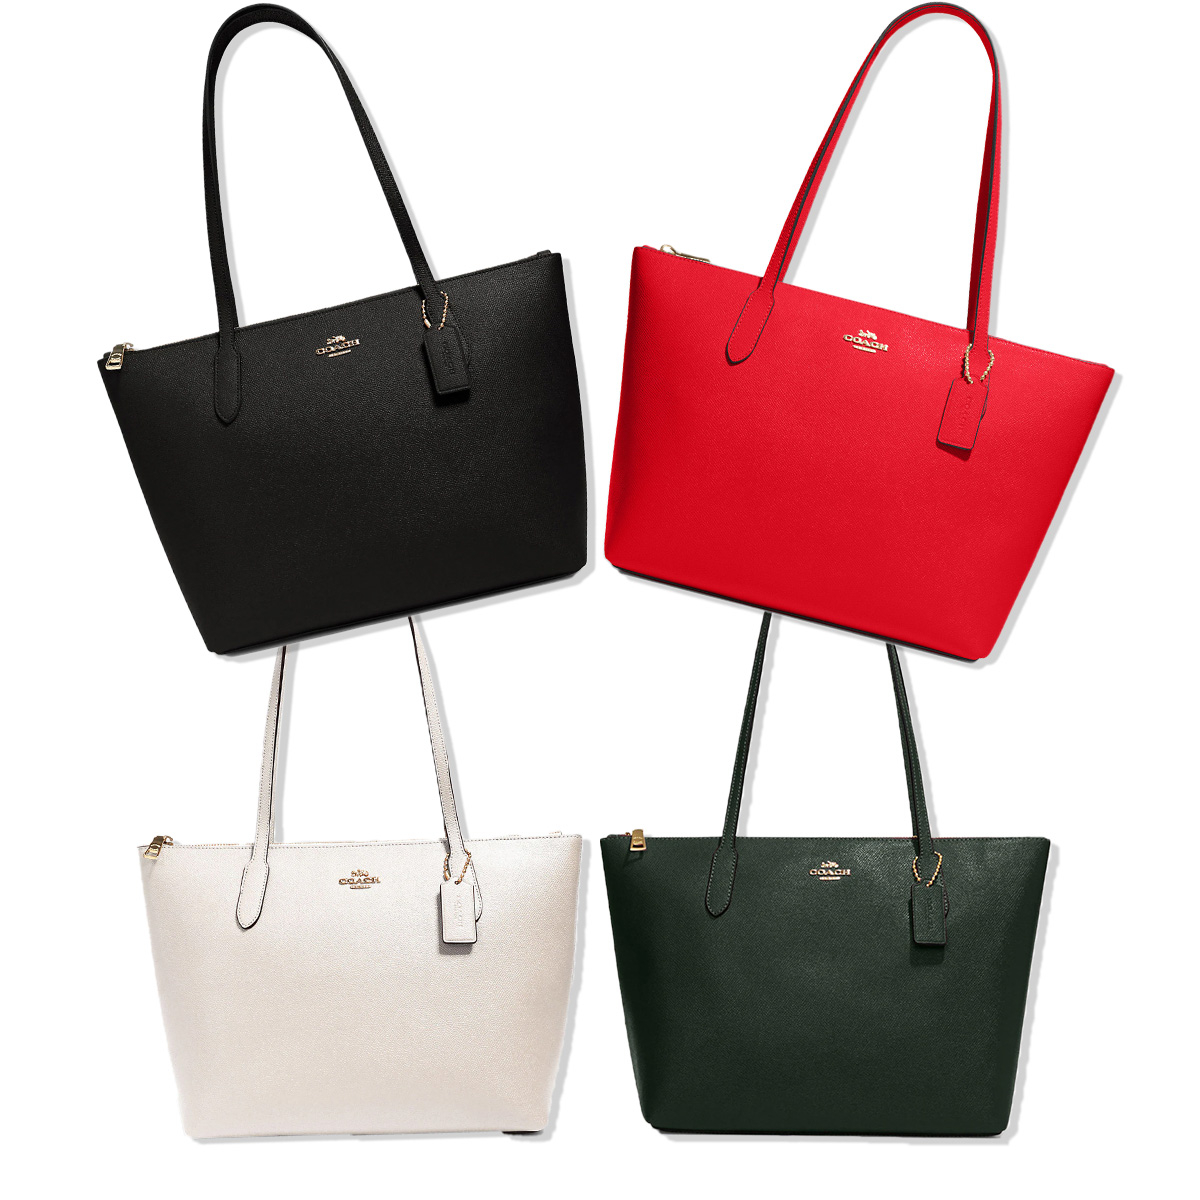 Coach Totes On Sale Up To 90% Off Retail